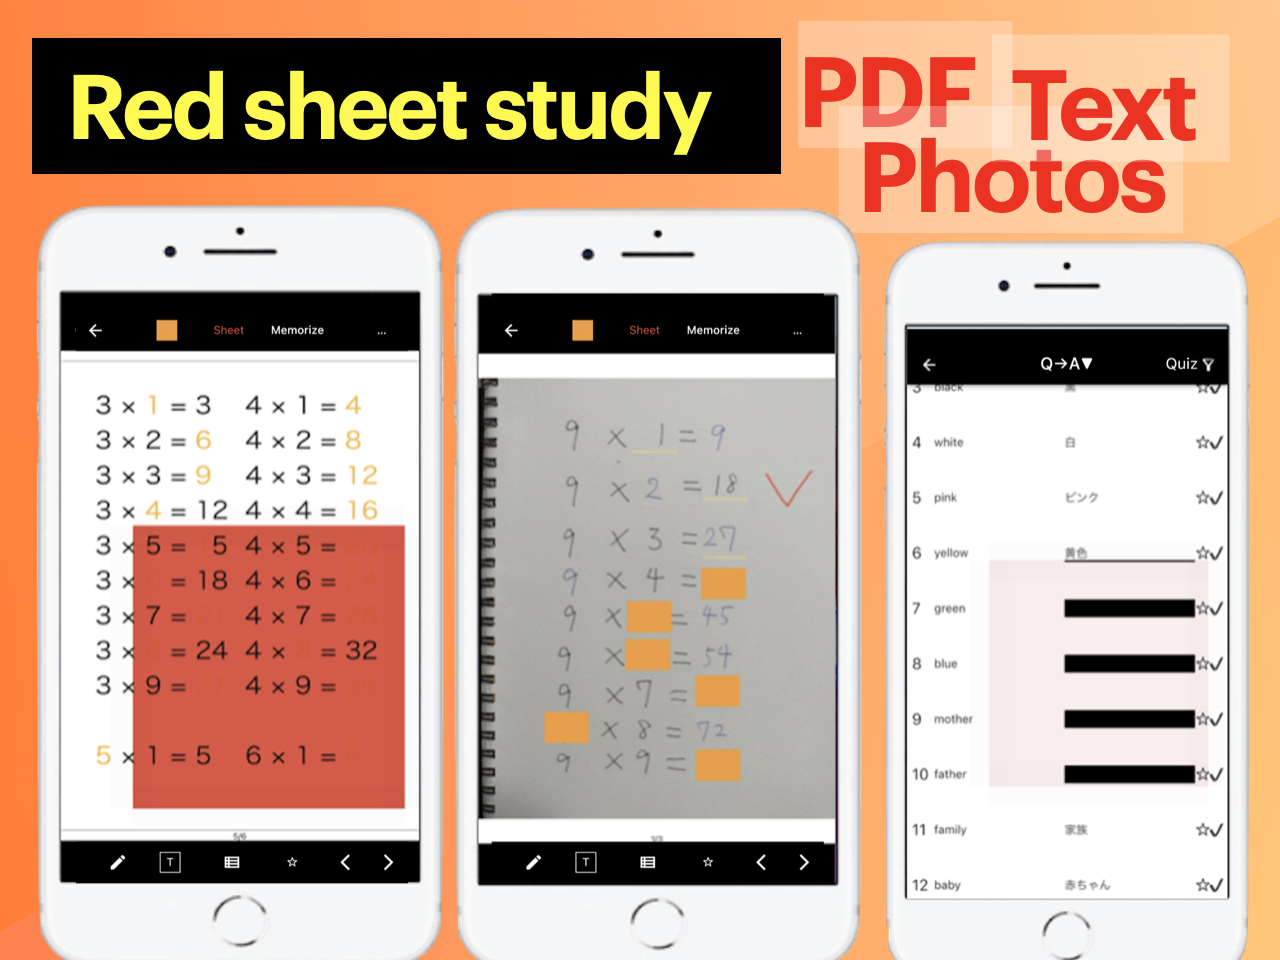 Study with a red sheet? Memorize with photos? Did you try them?